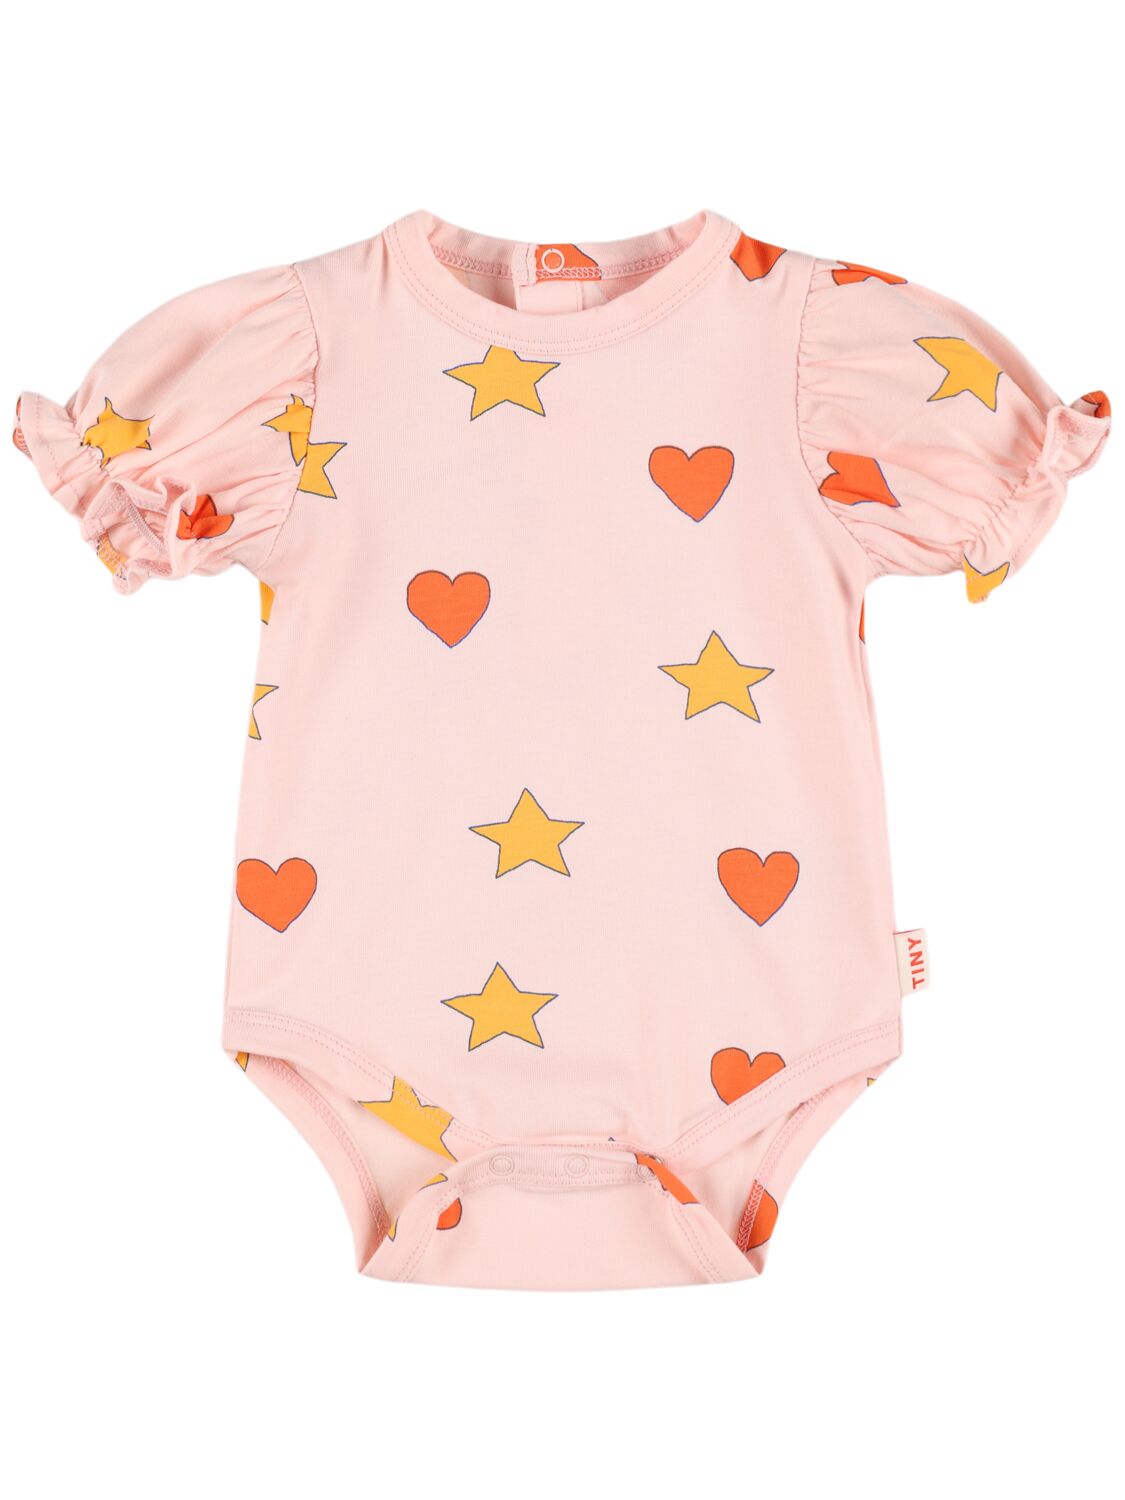 Tiny Cottons Babies' Printed Pima Cotton Bodysuit In Light Pink